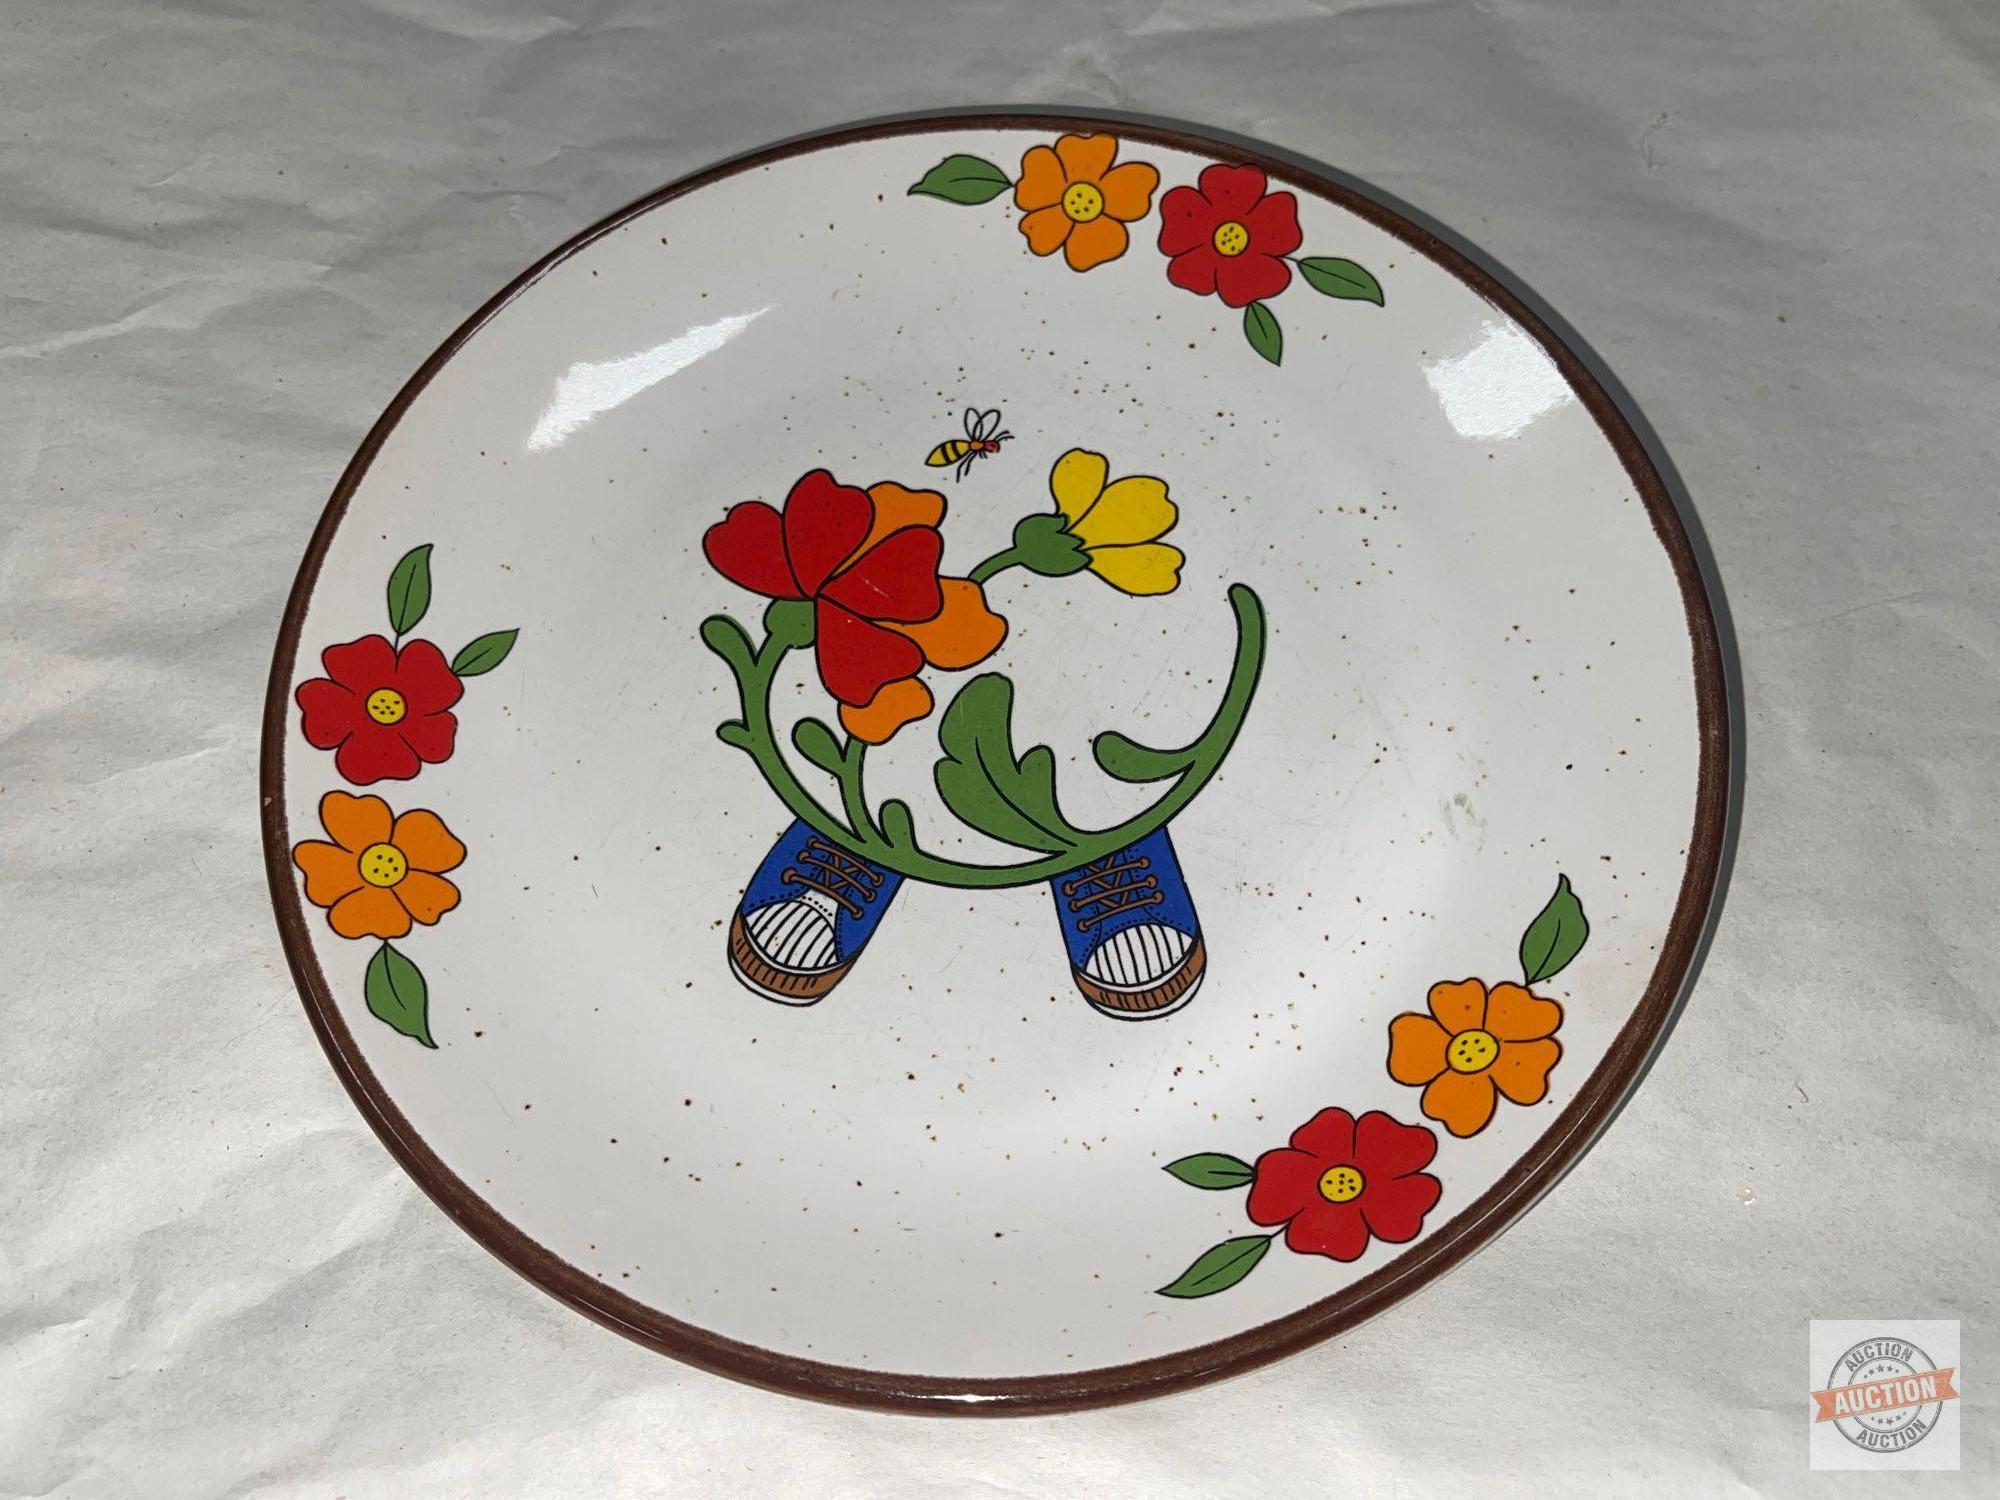 Dish ware - 4 Plates, Currier & Ives design 7 5/8"w and Takaheshi Peony in Glaze 7.5"w, Green Harmon